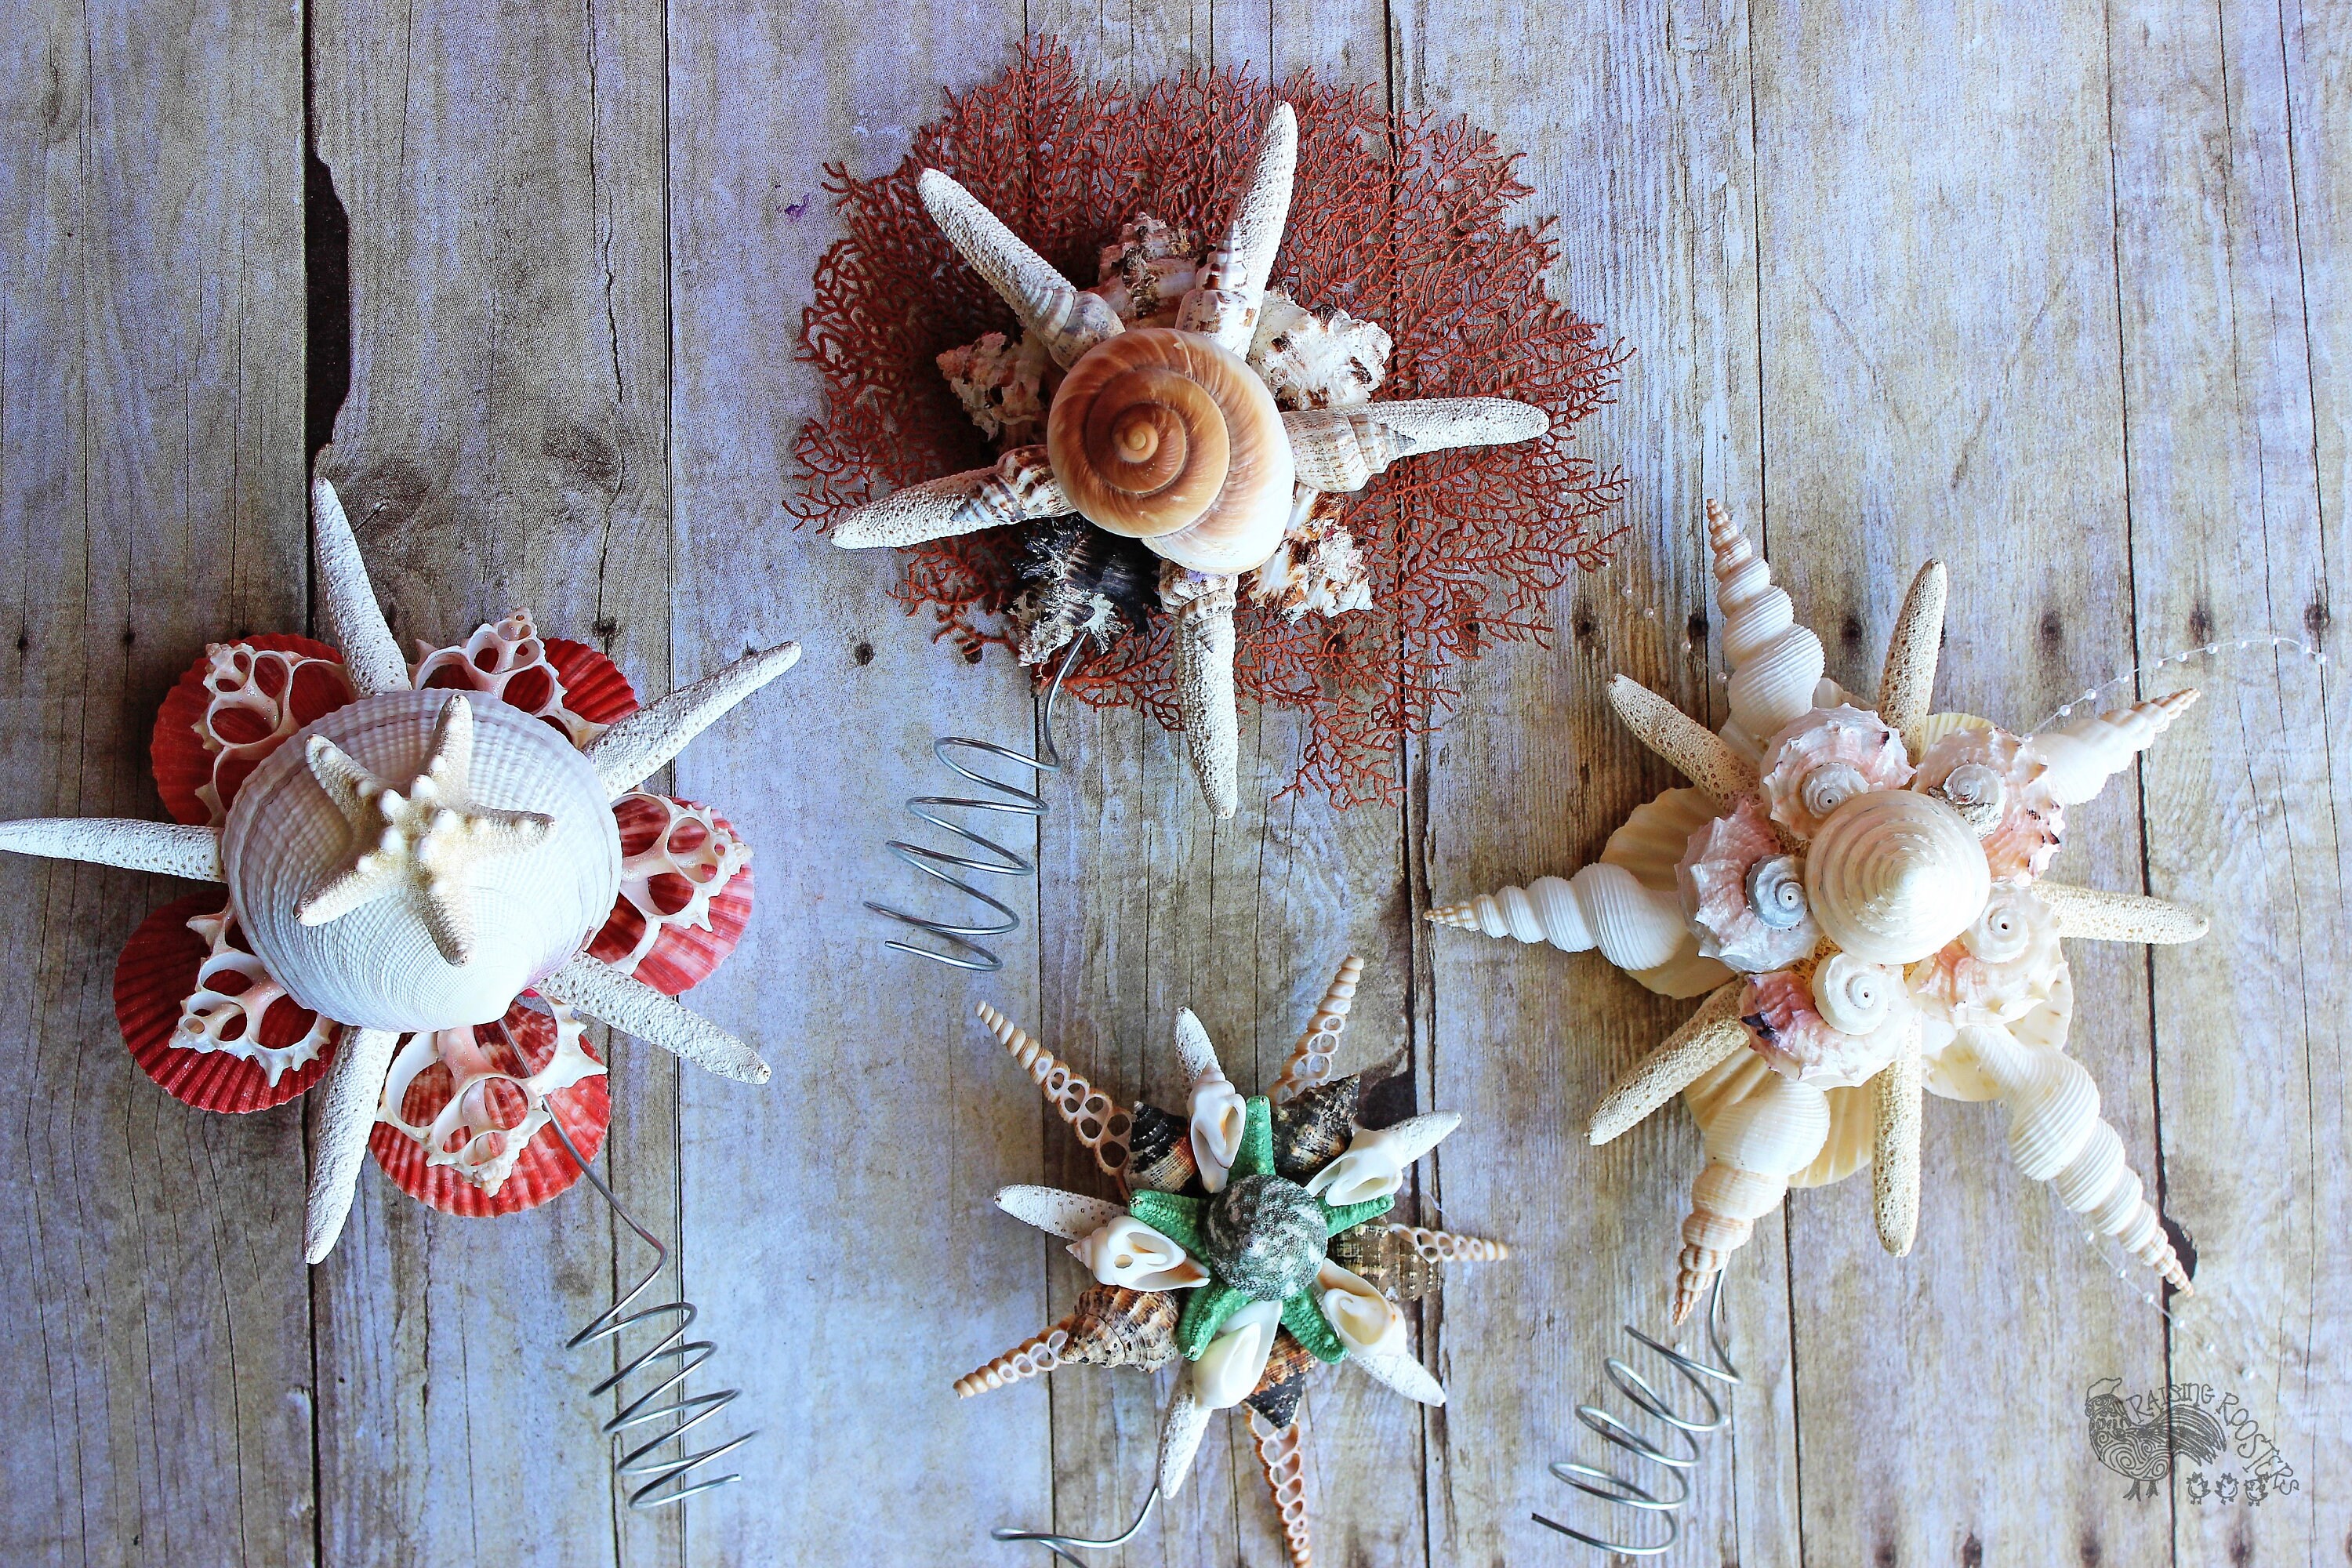 Camper Beach Themed Christmas Ornament Starfish Shells with a Sisal Tree